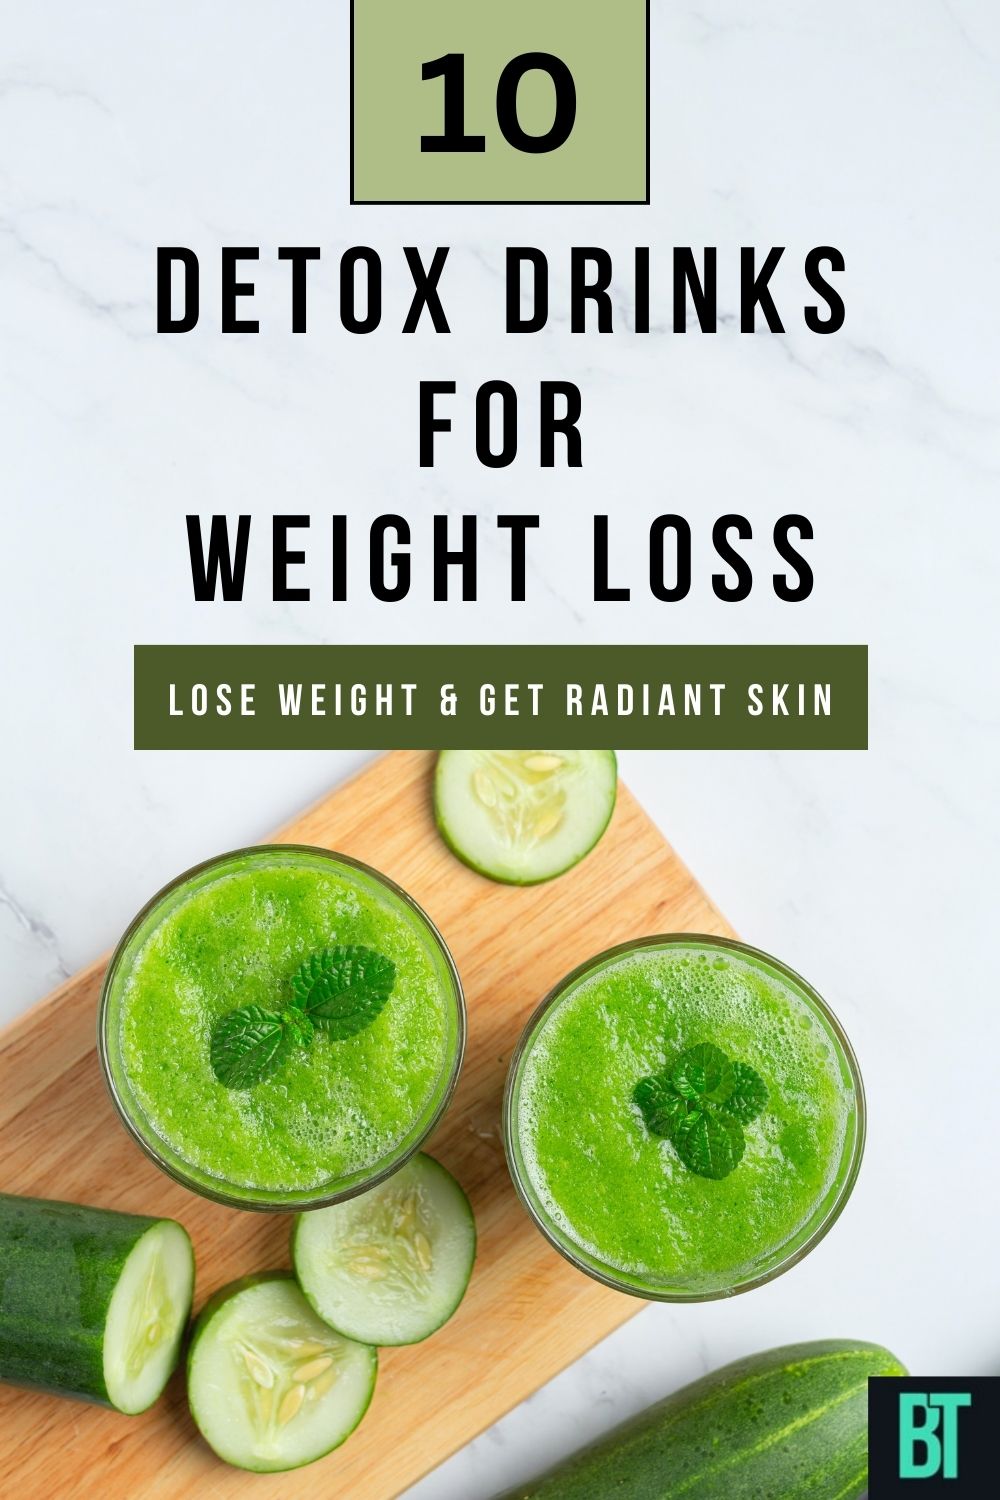 10 Detox Drinks for Weight Loss and Radiant Skin